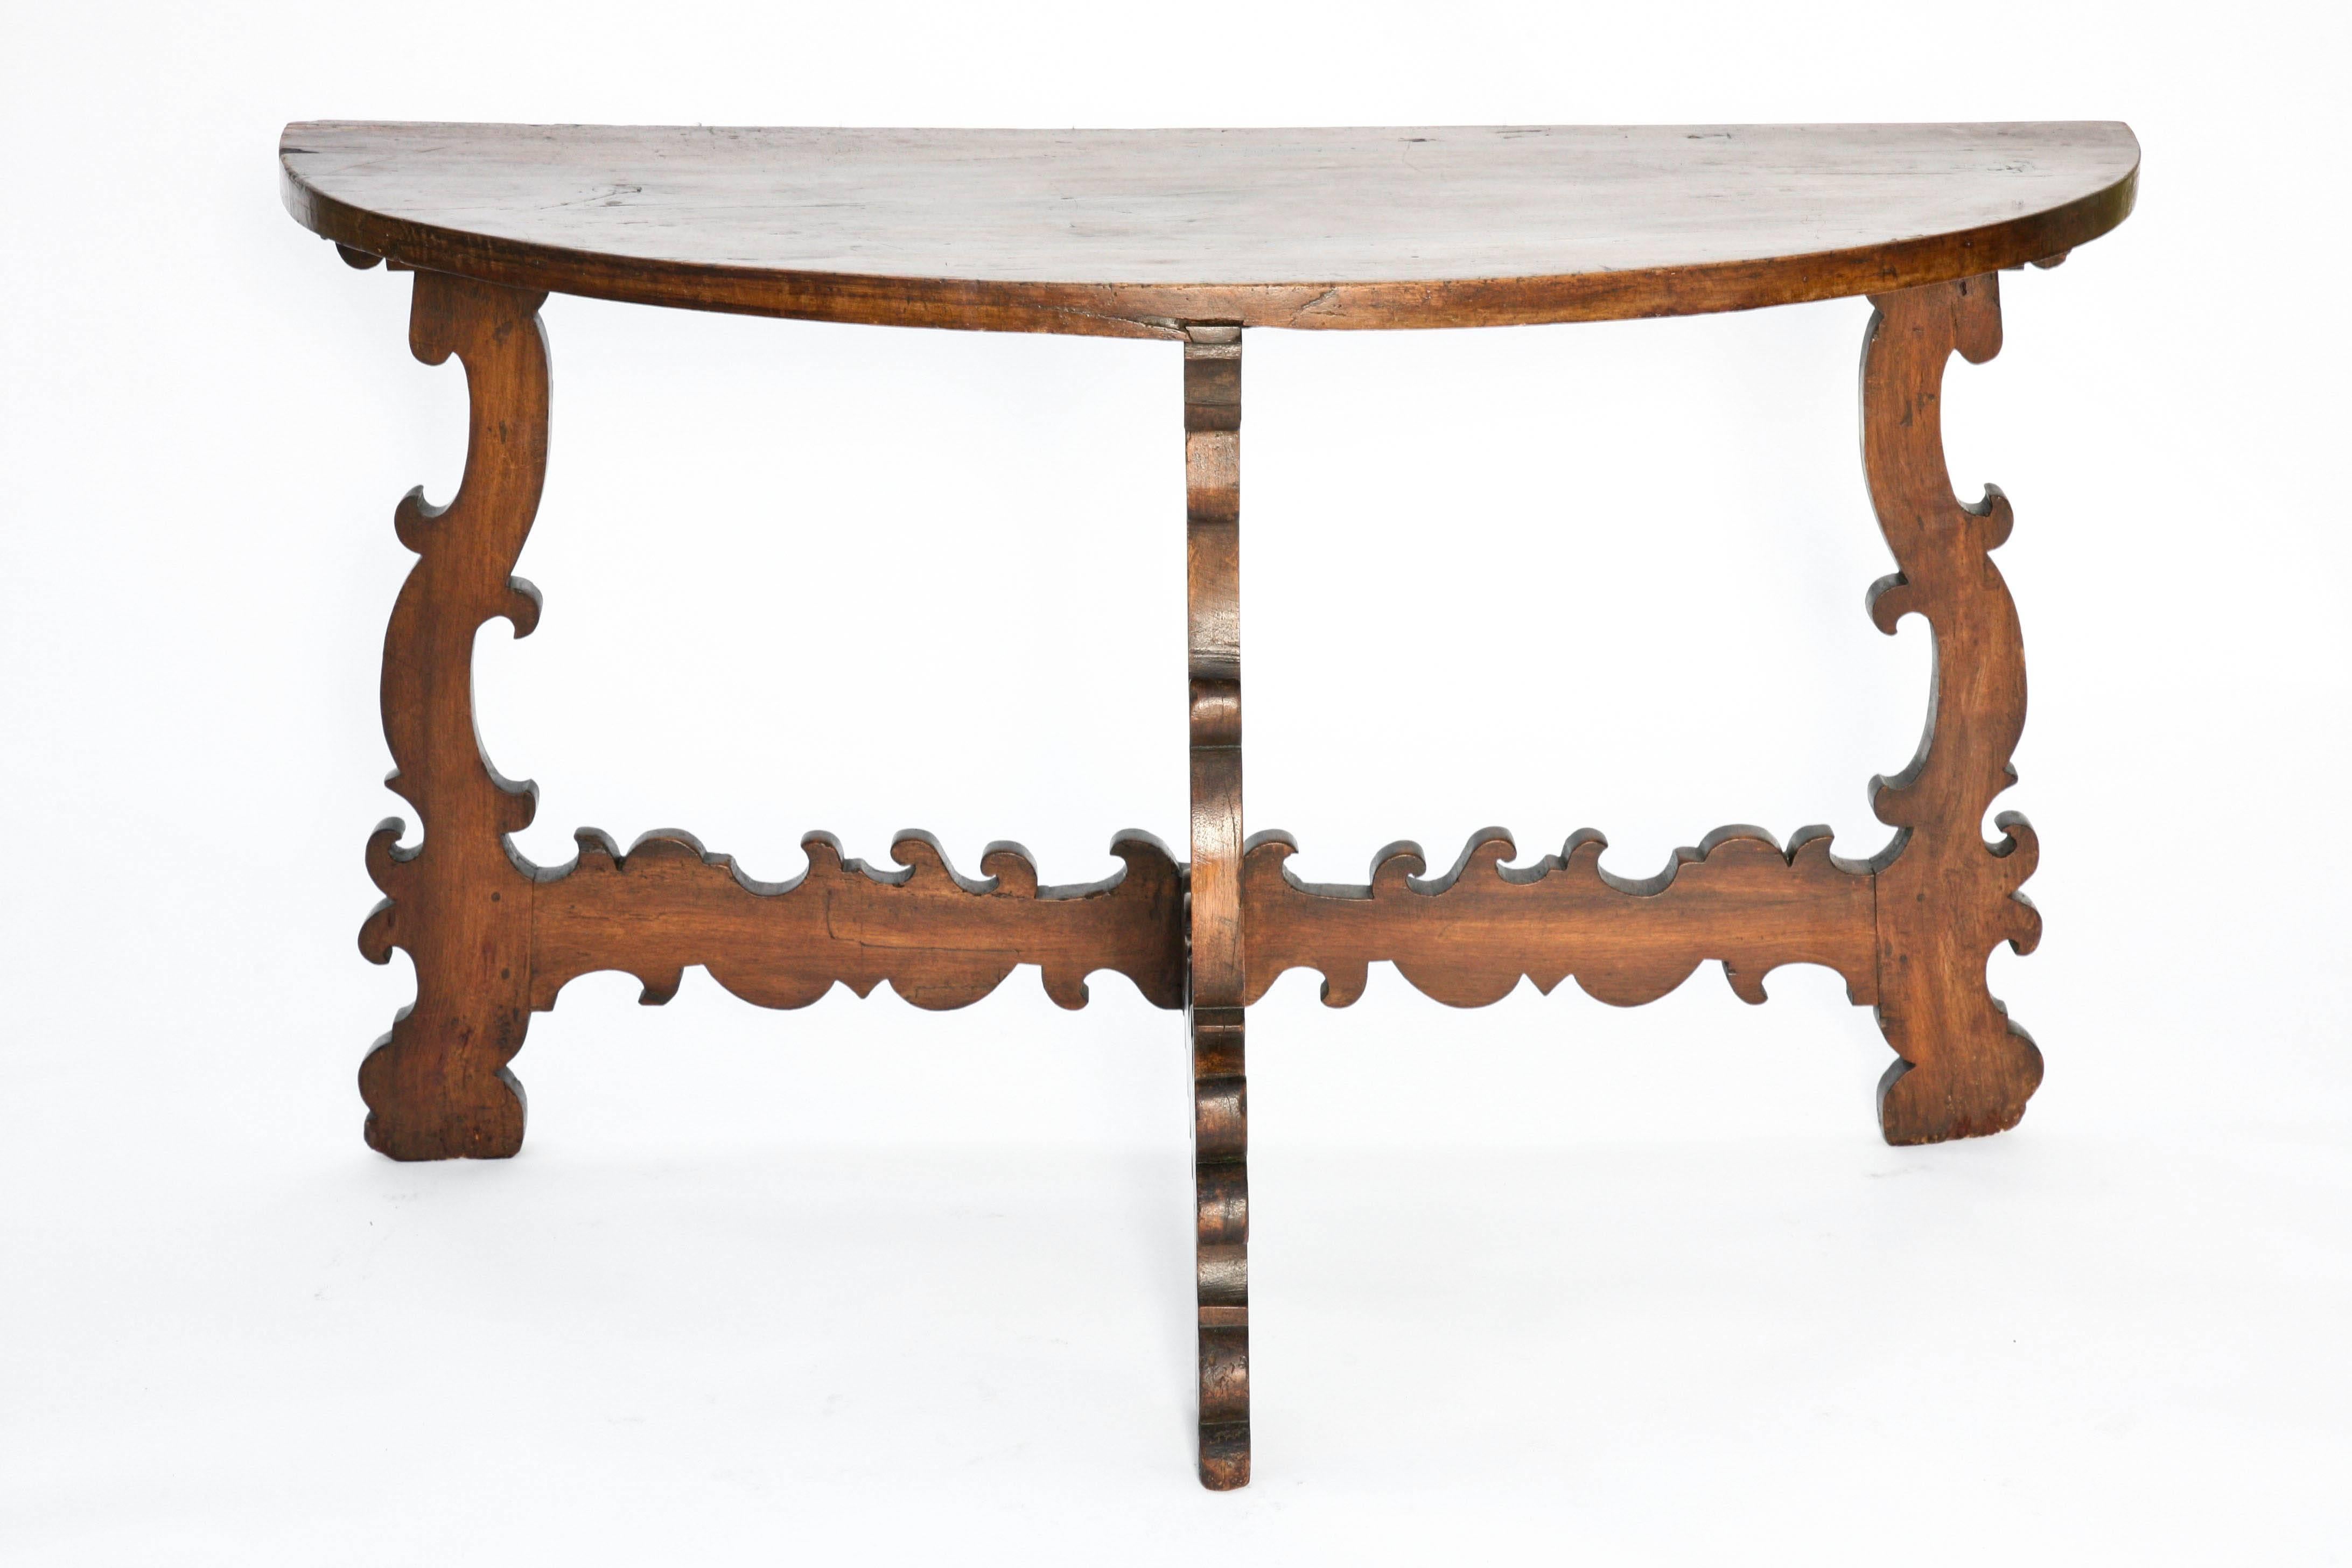 Console table, of walnut, having demilune shaped top supported by wonderfully carved scrolling legs and stretchers.